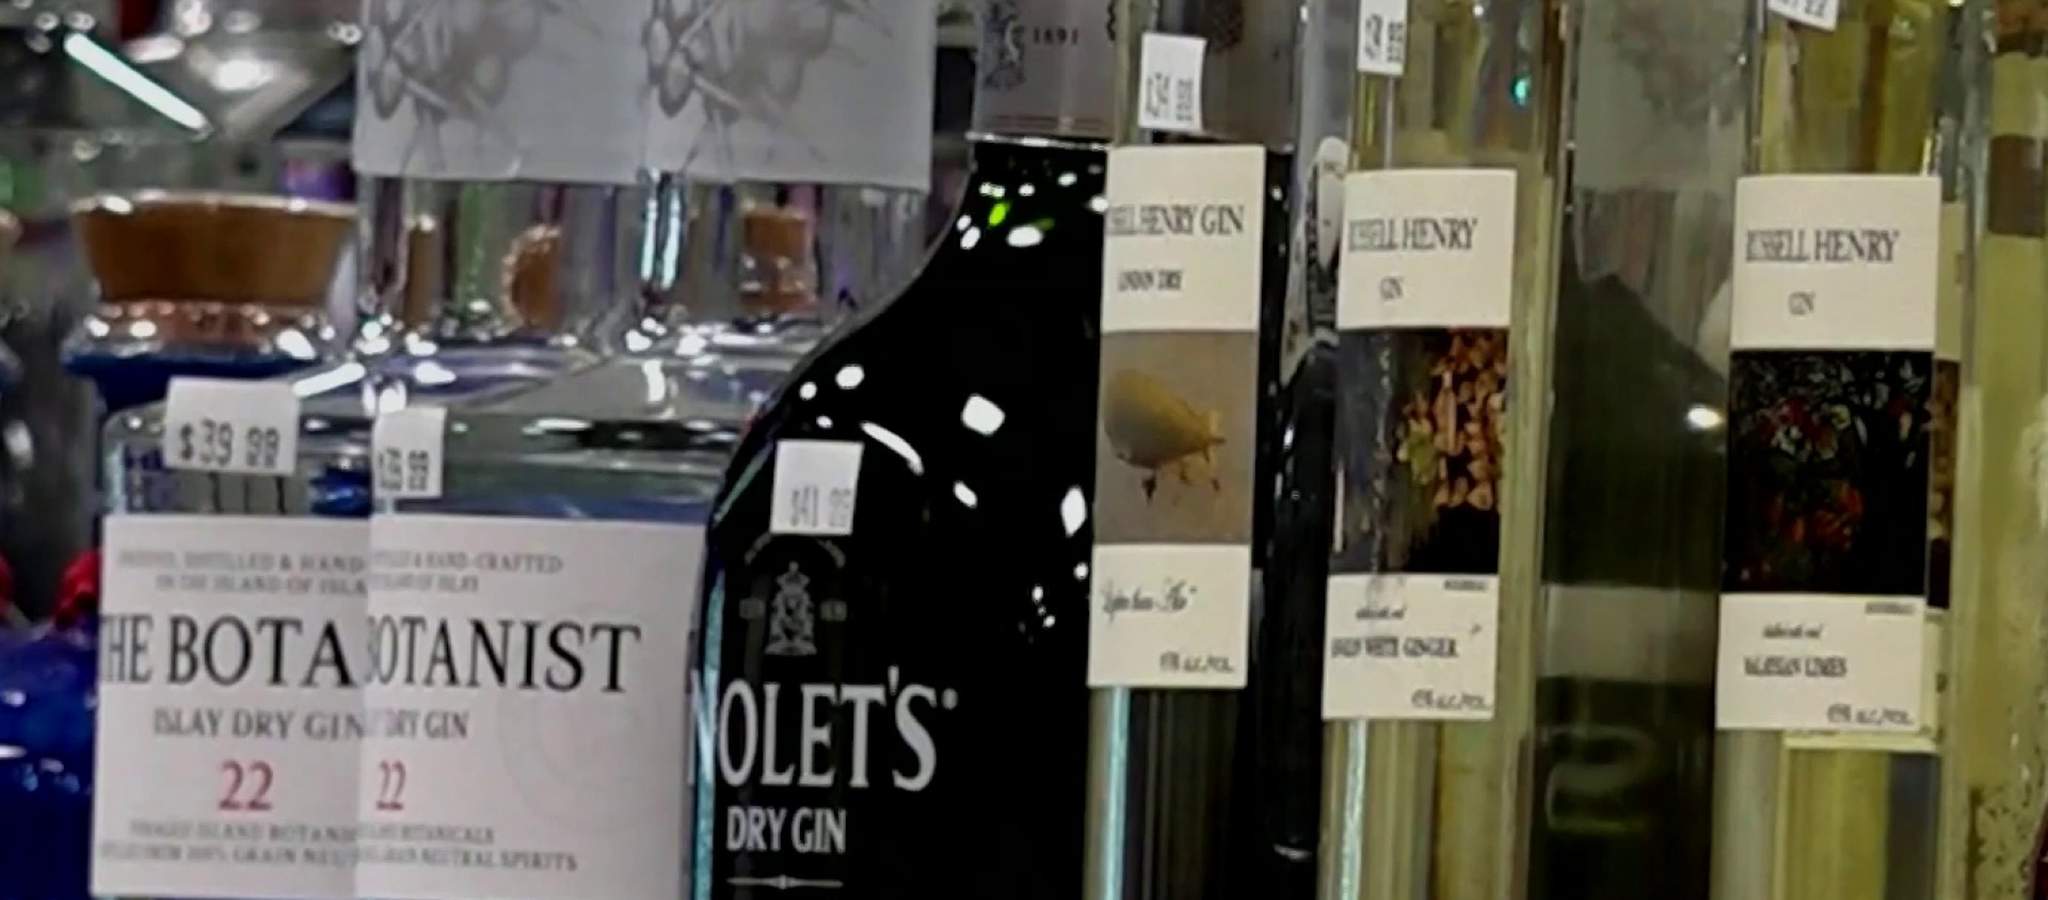 Bars, restaurants in unincorporated Brevard County can soon sell alcohol 24/7